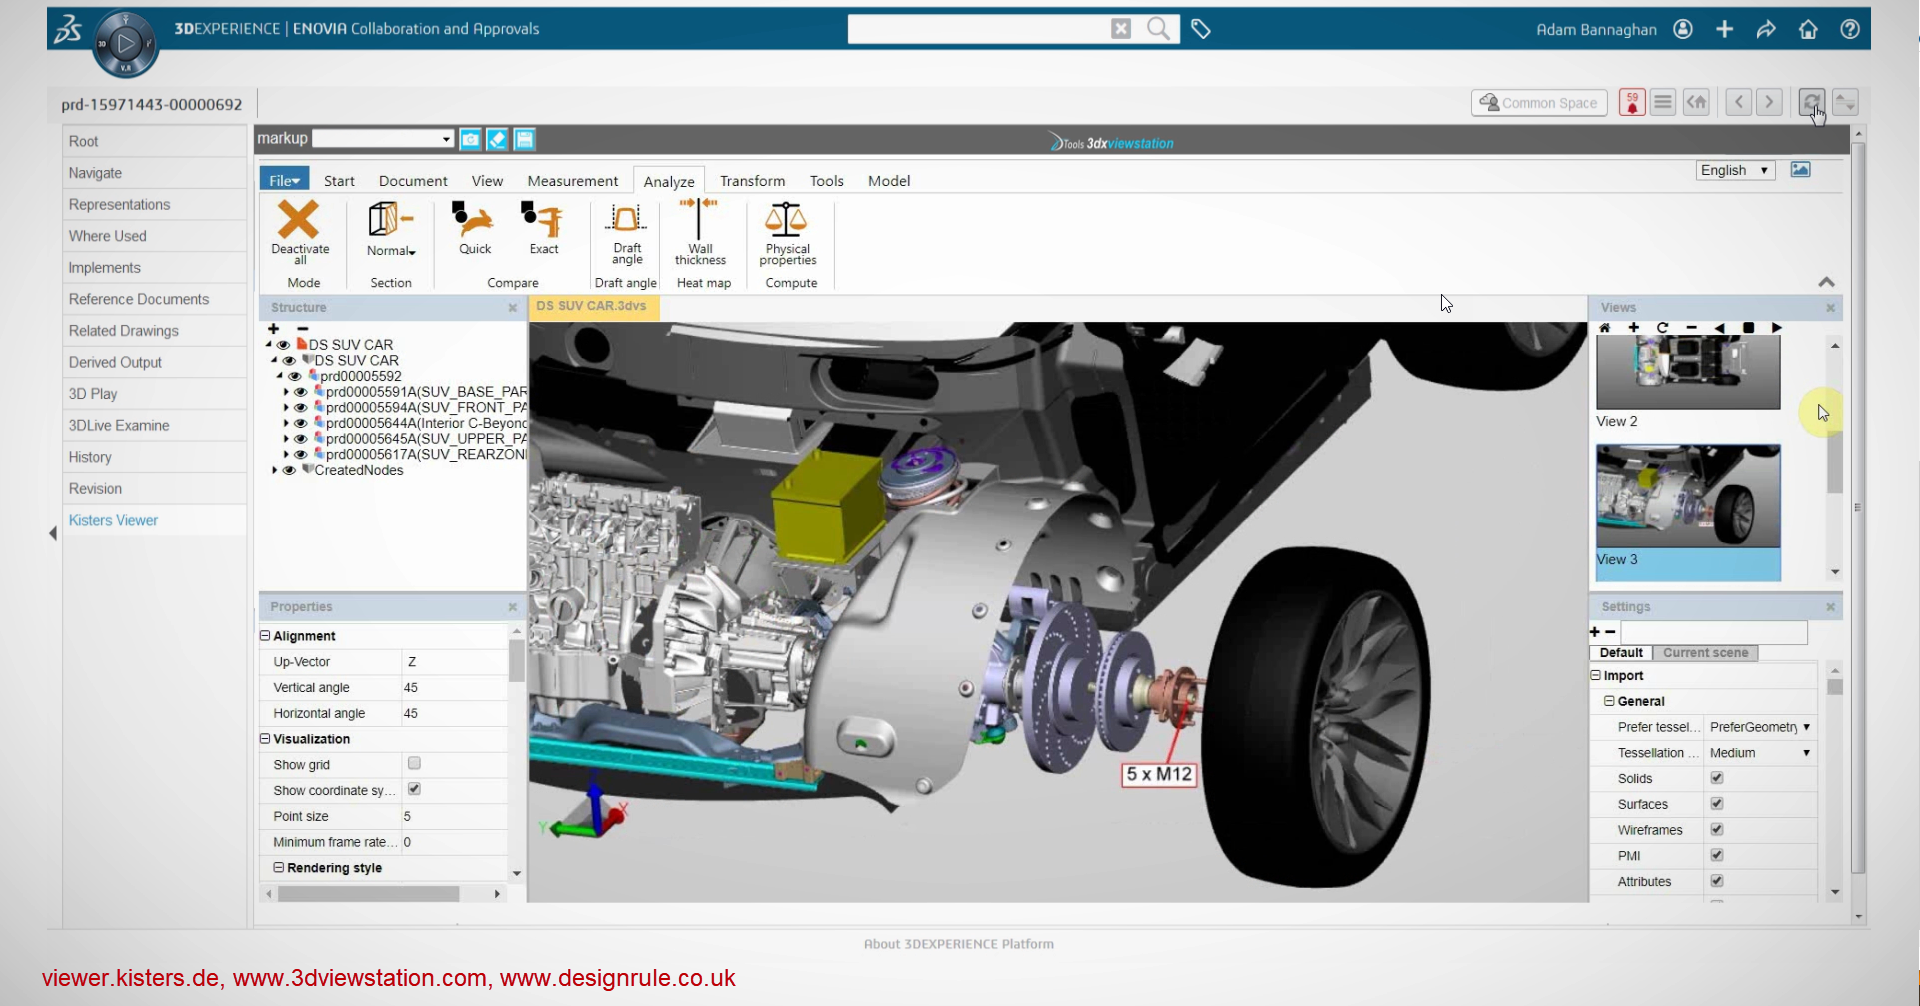 Catia viewer for 3DExperience and SmarTeam